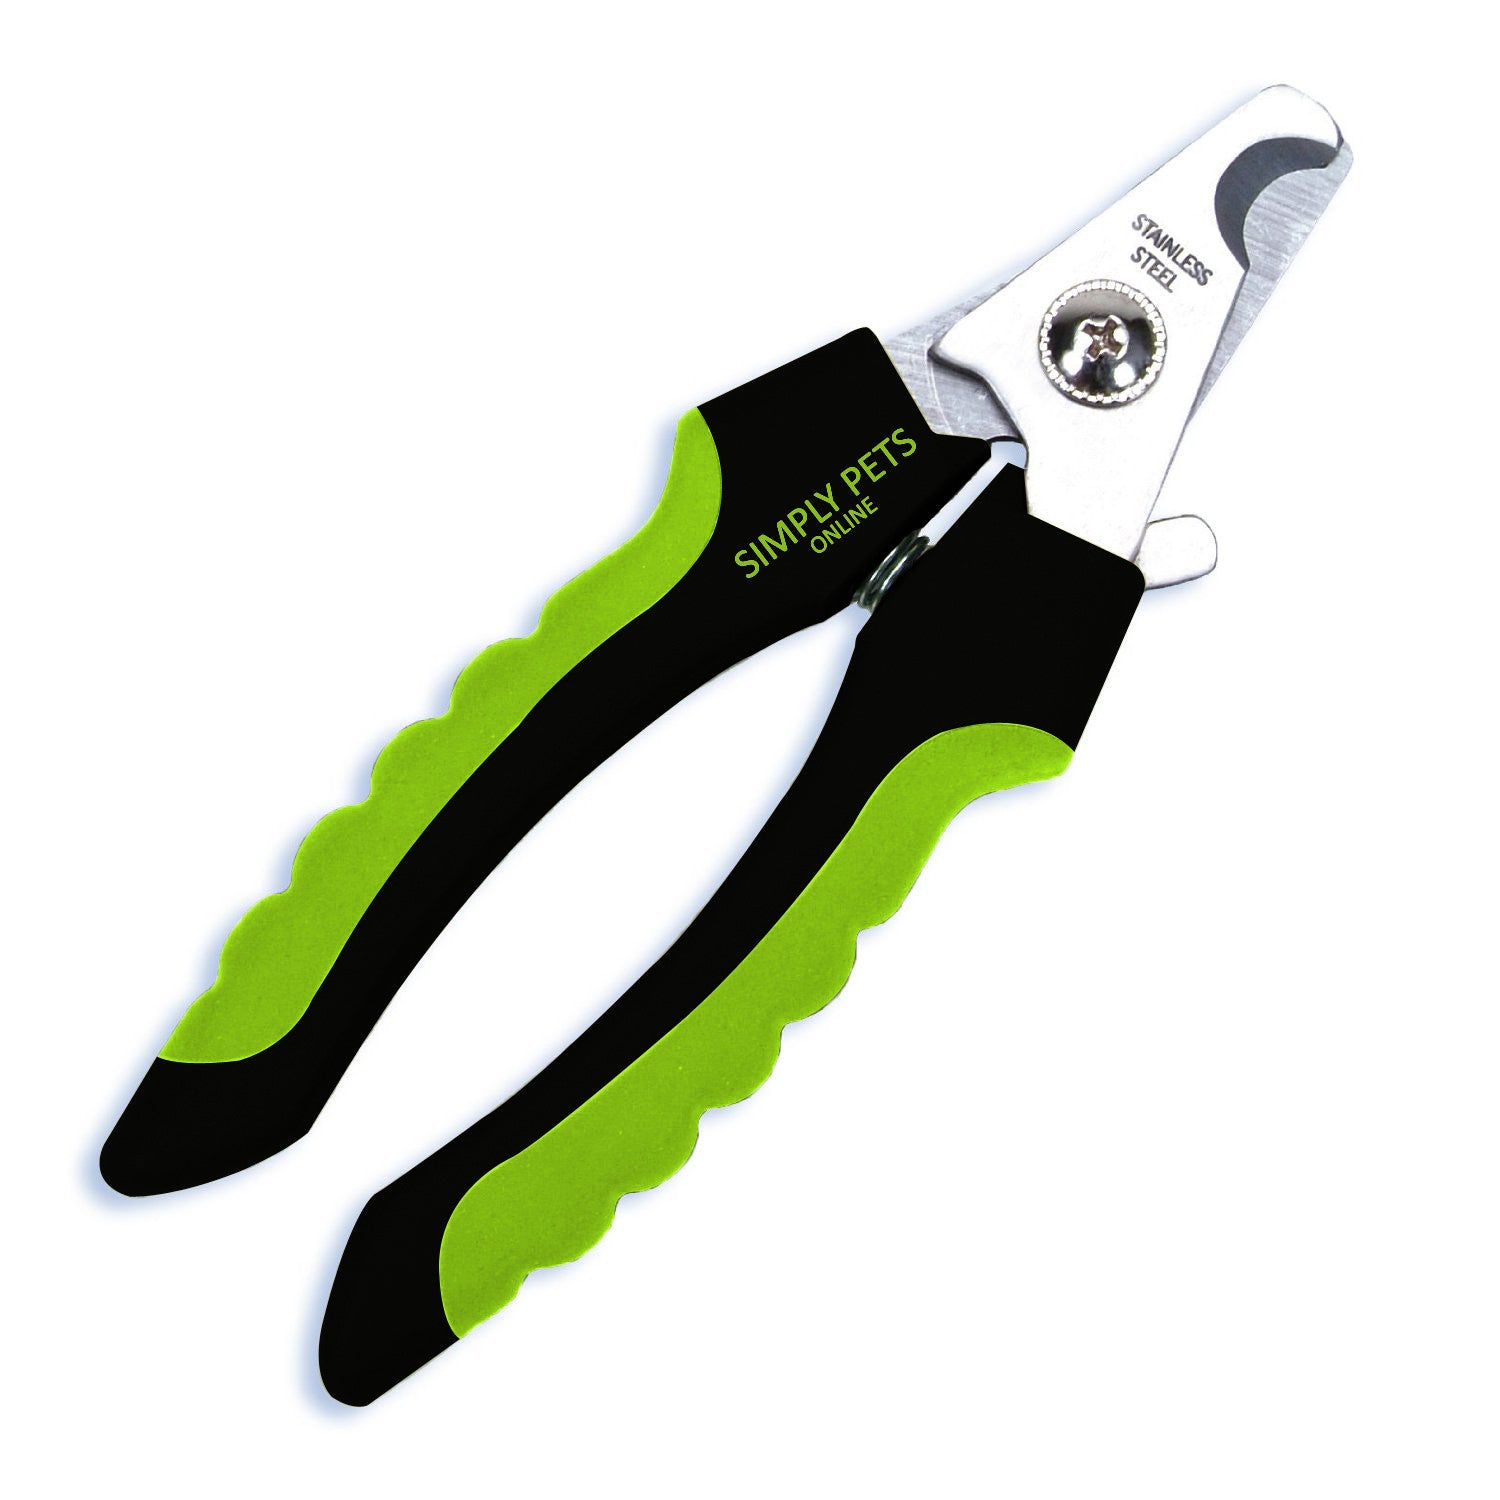 Professional Dog Nail Clippers ! Sharp Steel Blades ! Easy To Use |  Petstoreo